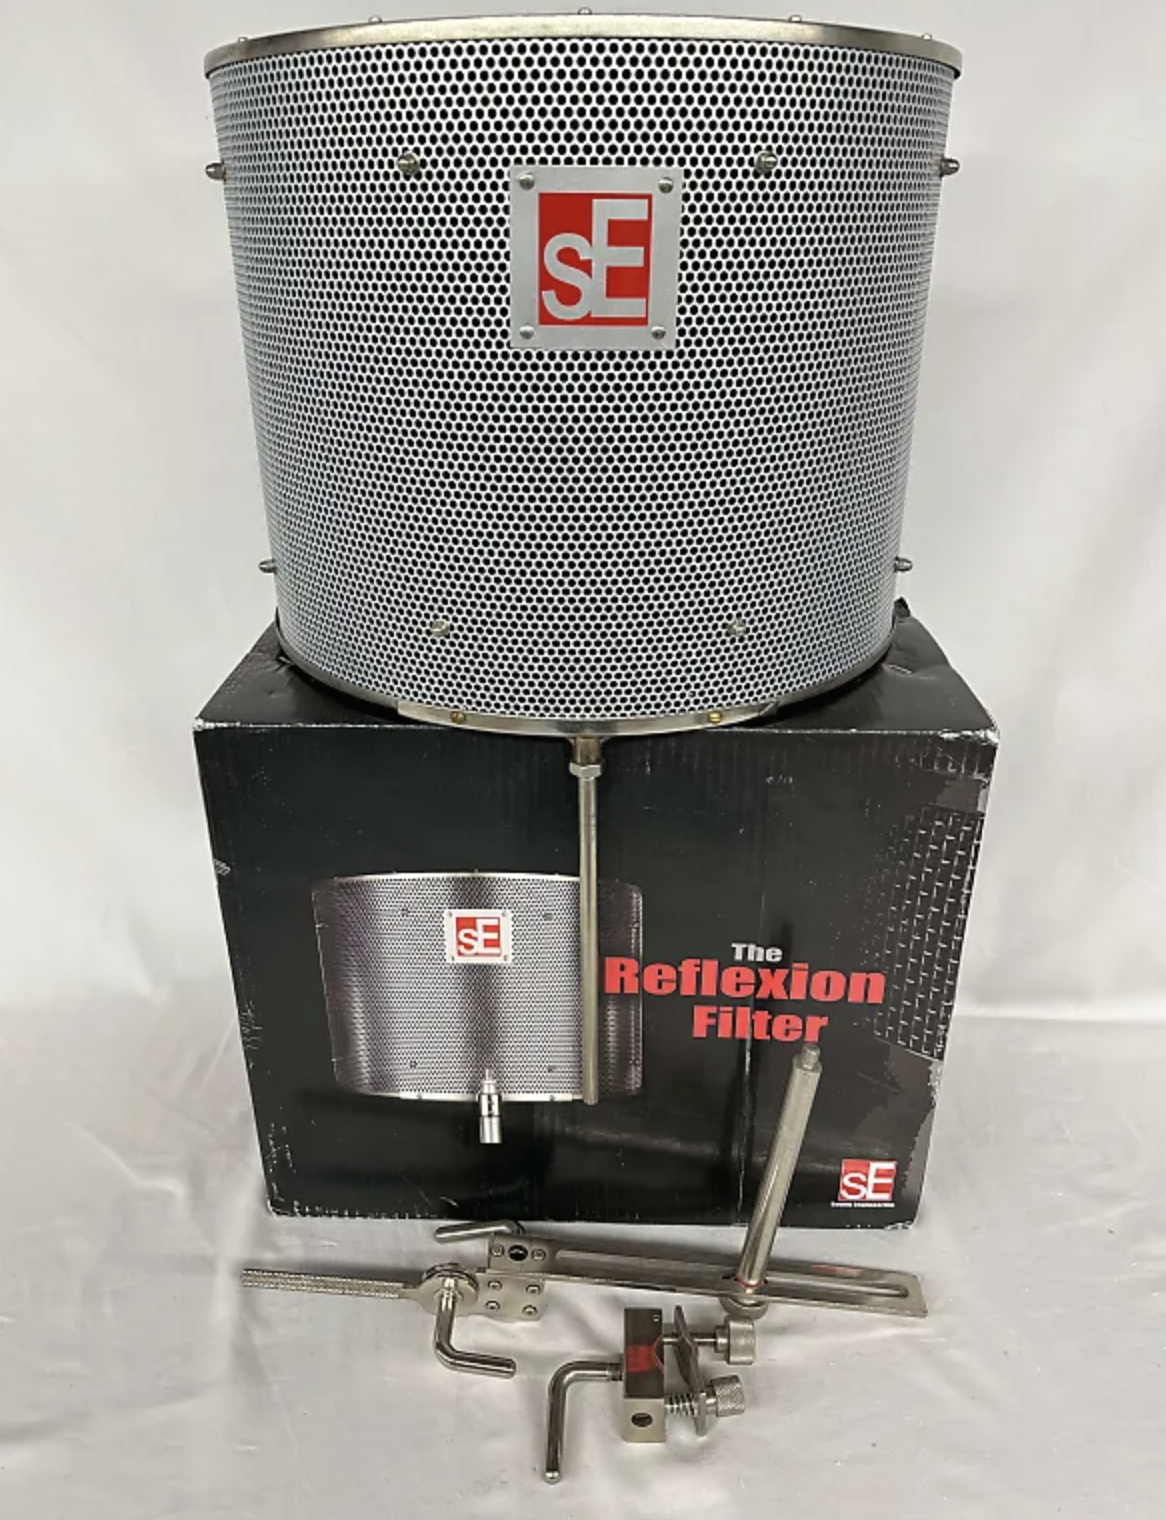 Used sE Electronics Reflexion Filter PRO - Sweetwater's Gear Exchange